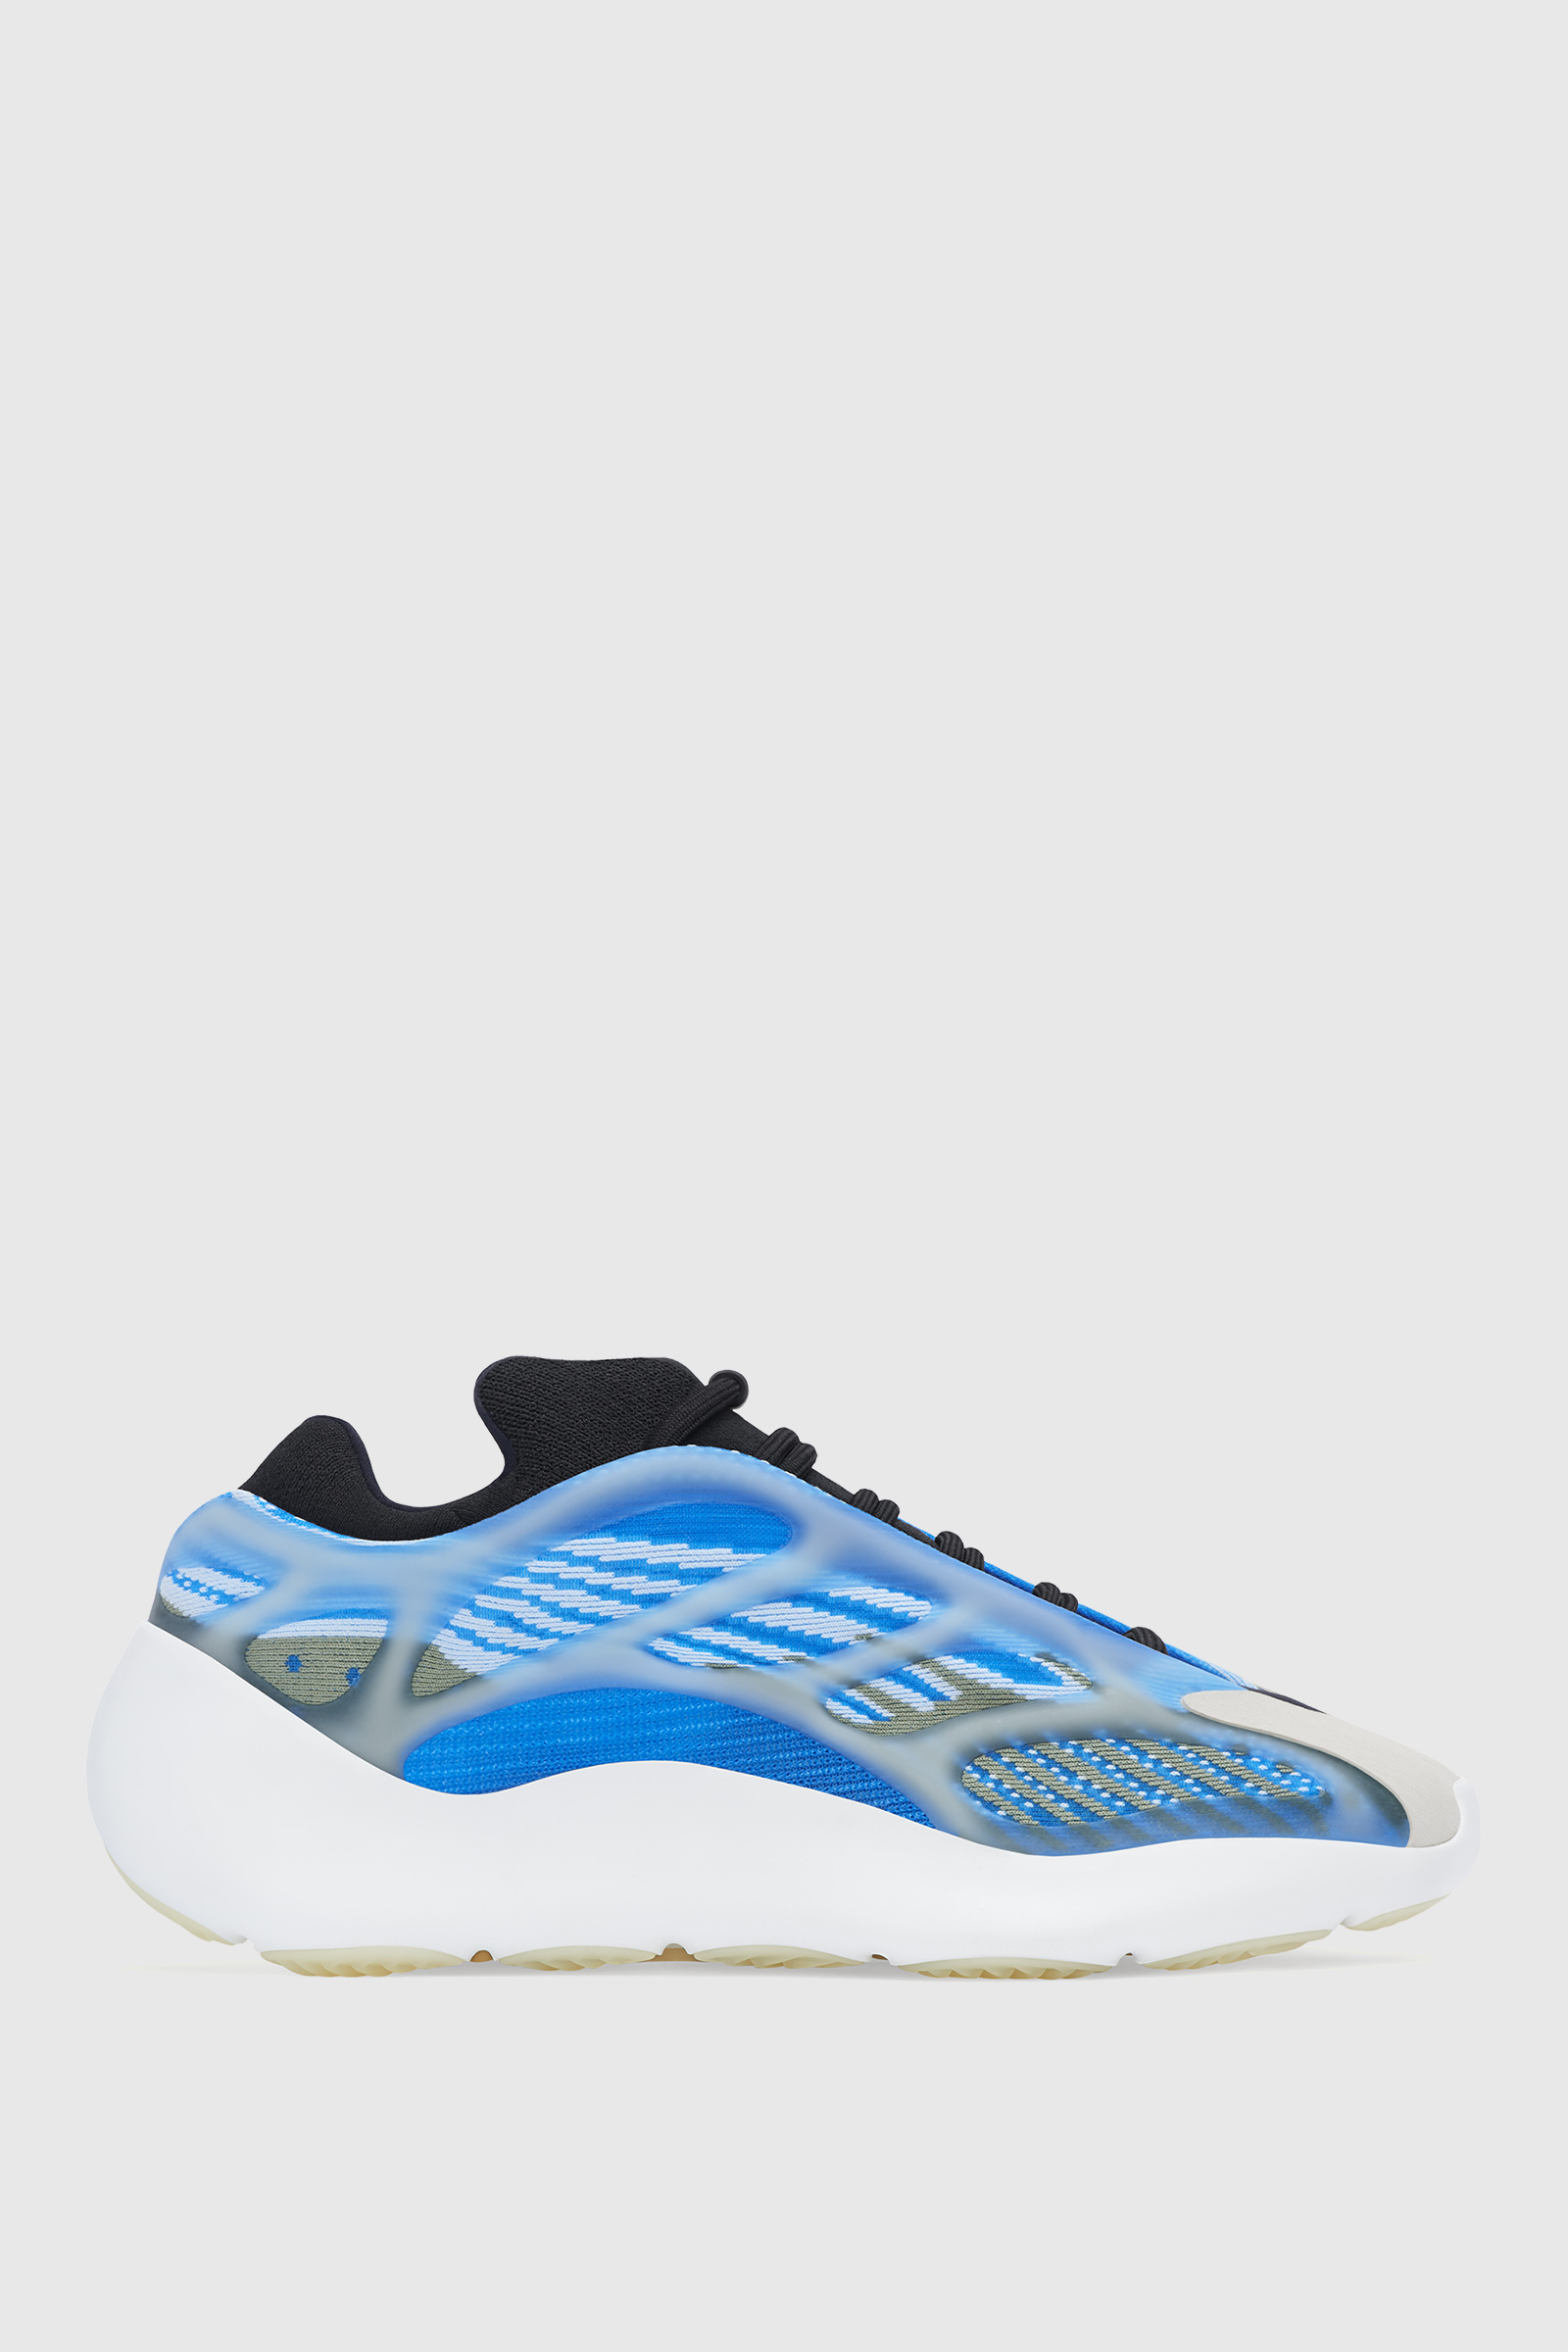 where can i buy yeezy 700